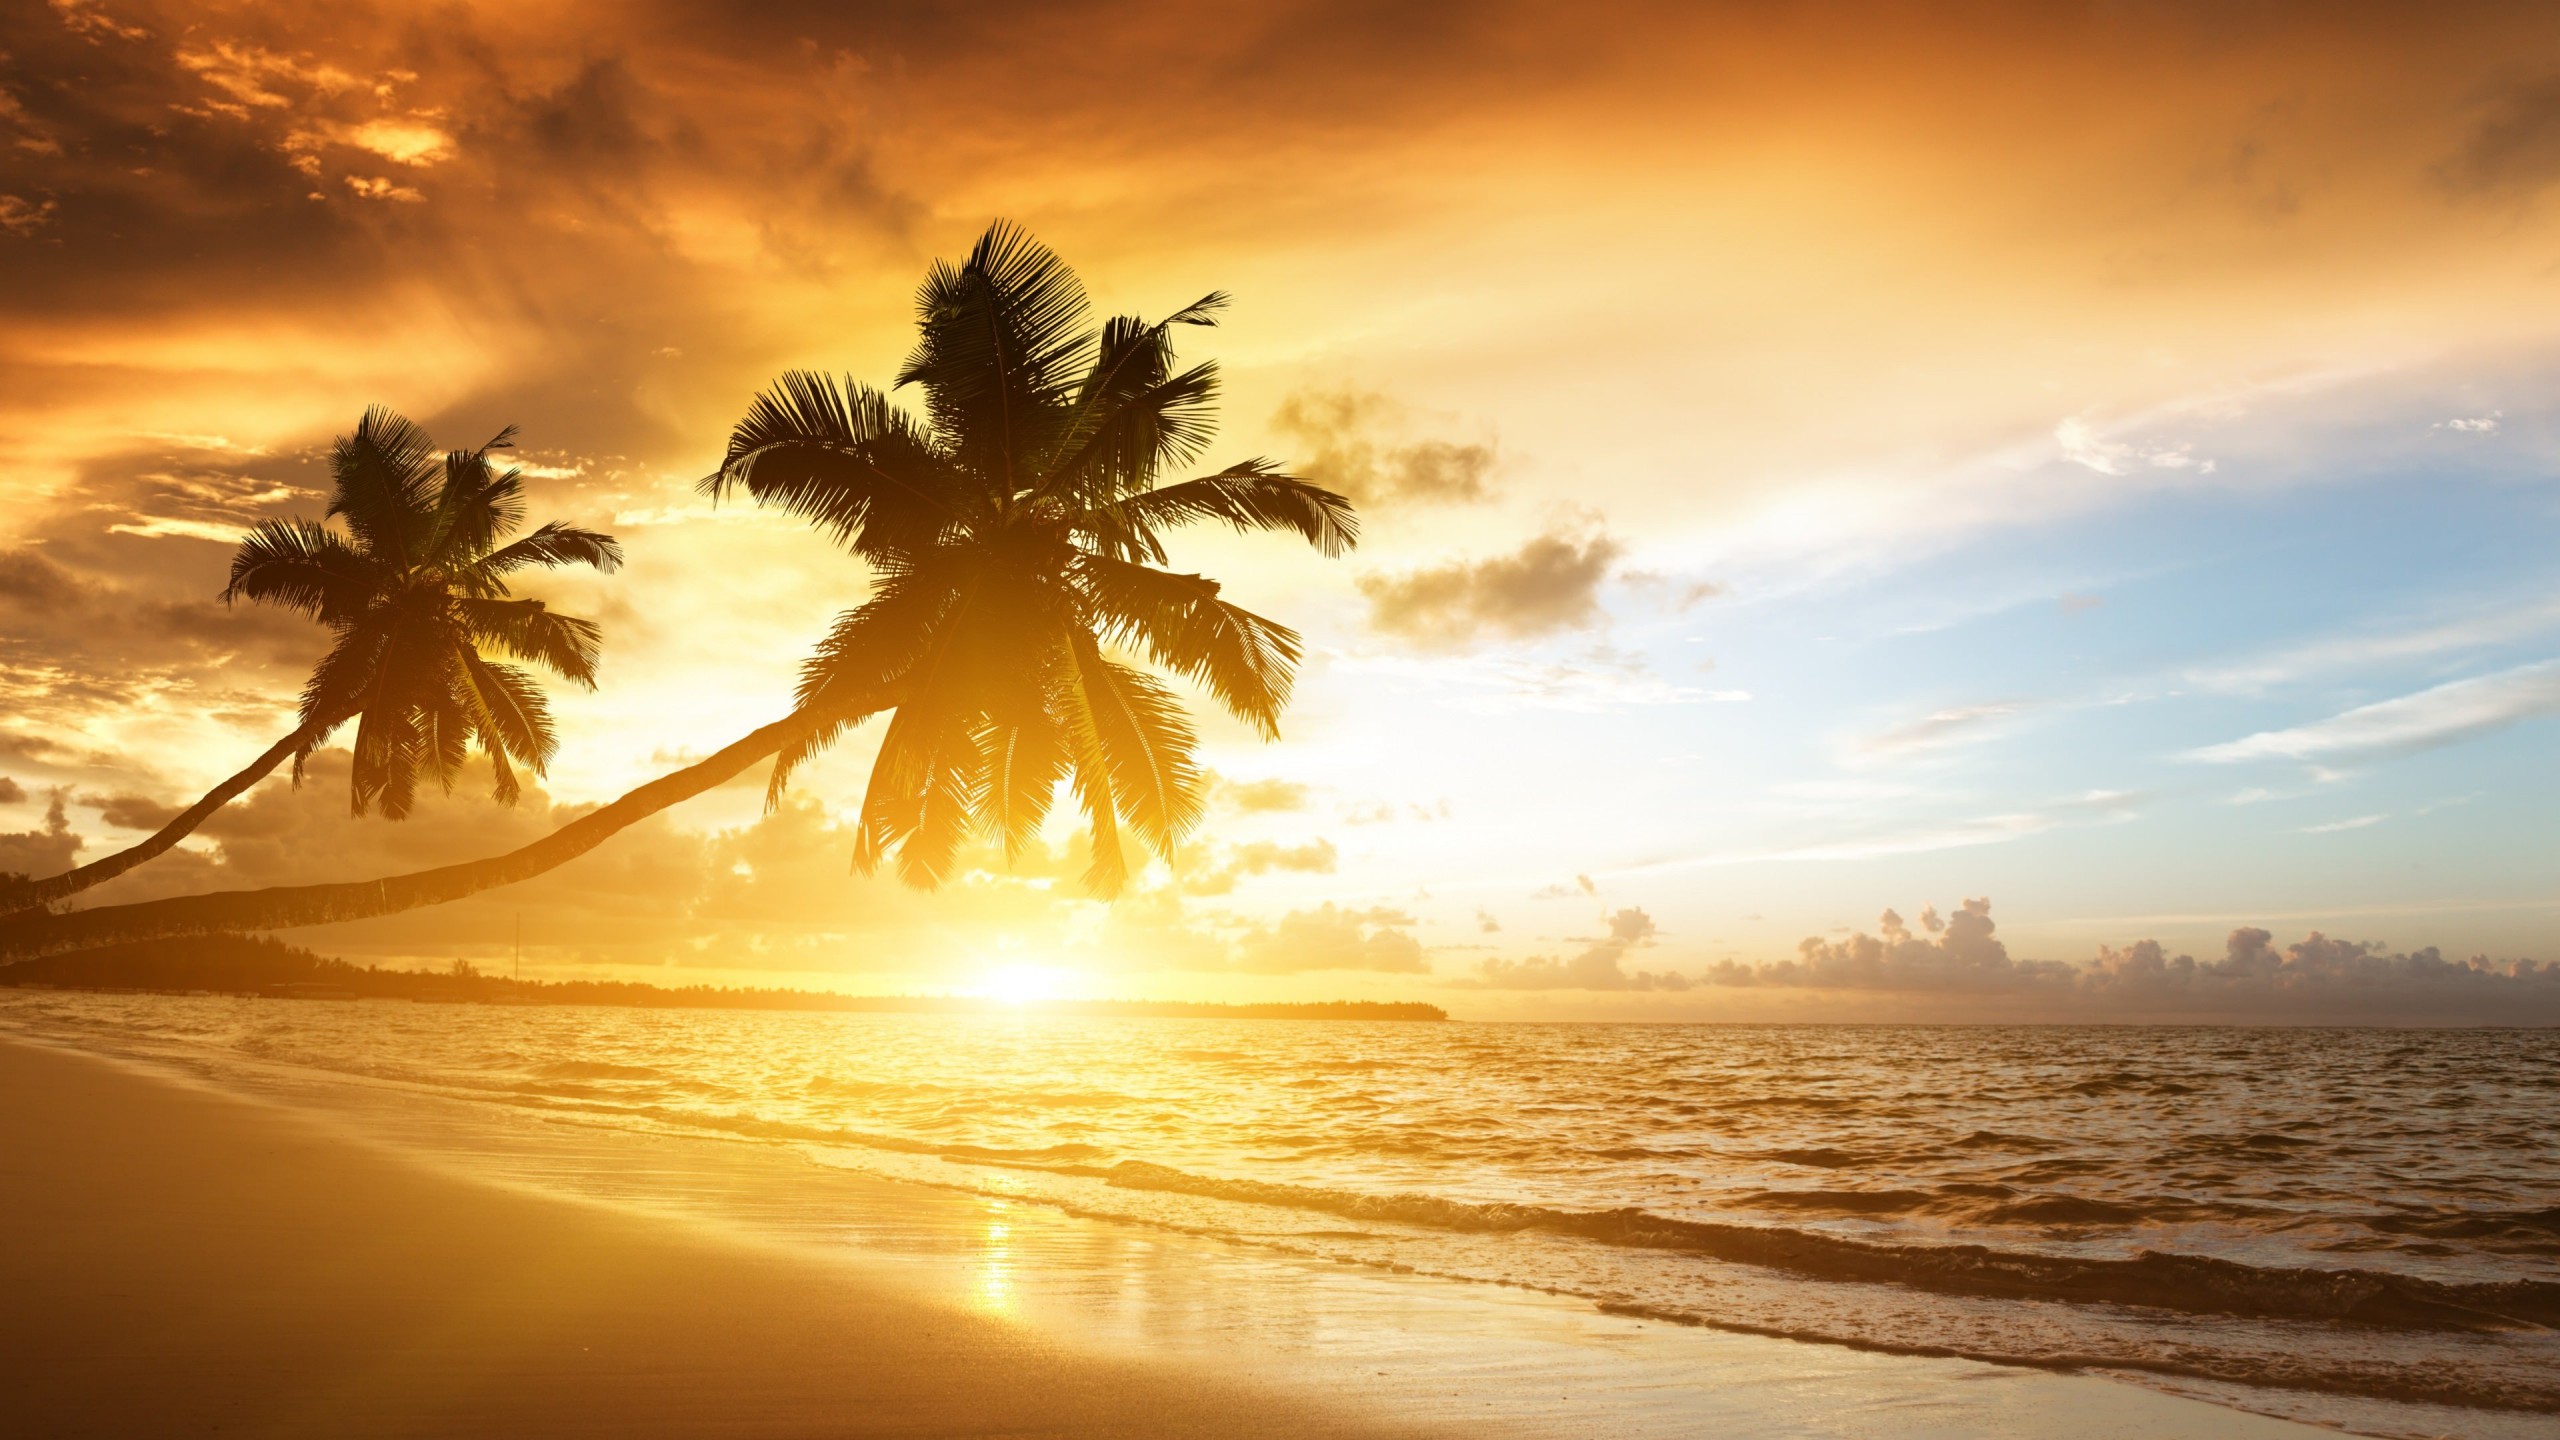 Beach With Palm Trees At Sunset Wallpaper for Desktop 2560x1440